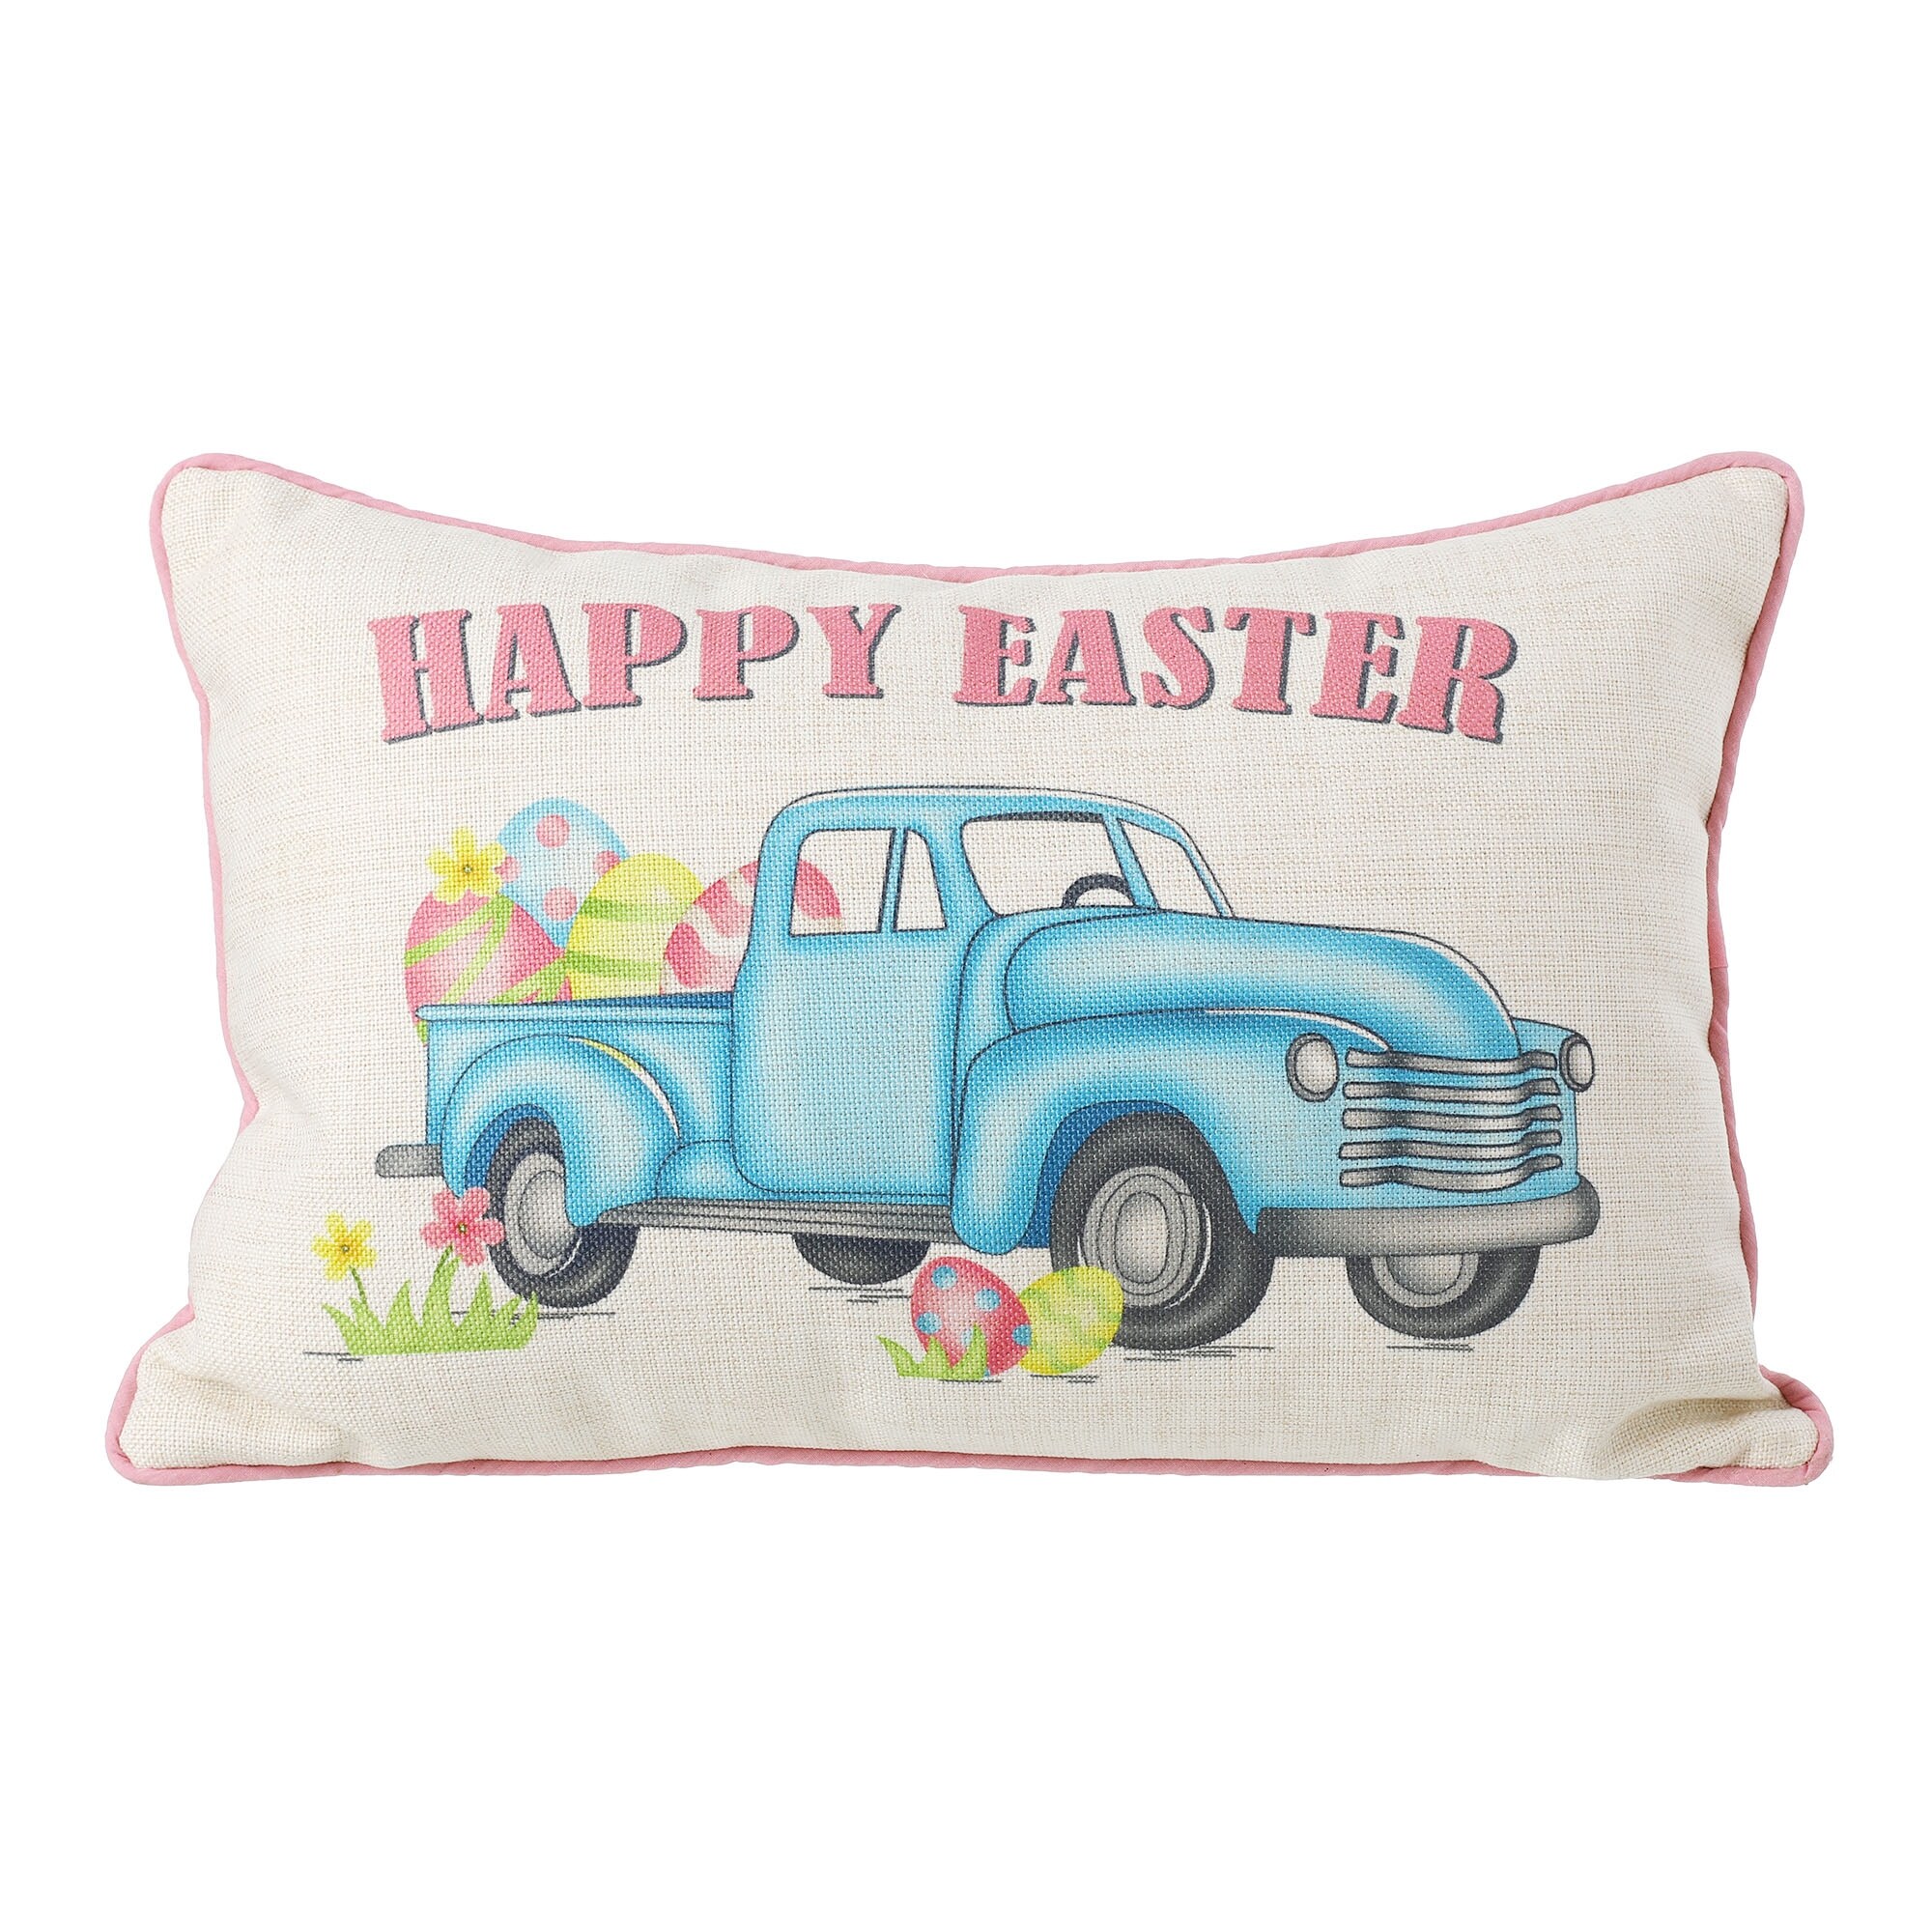 Happy Easter Bunny Ears - Spring Pillow Cover - 18x18 inches